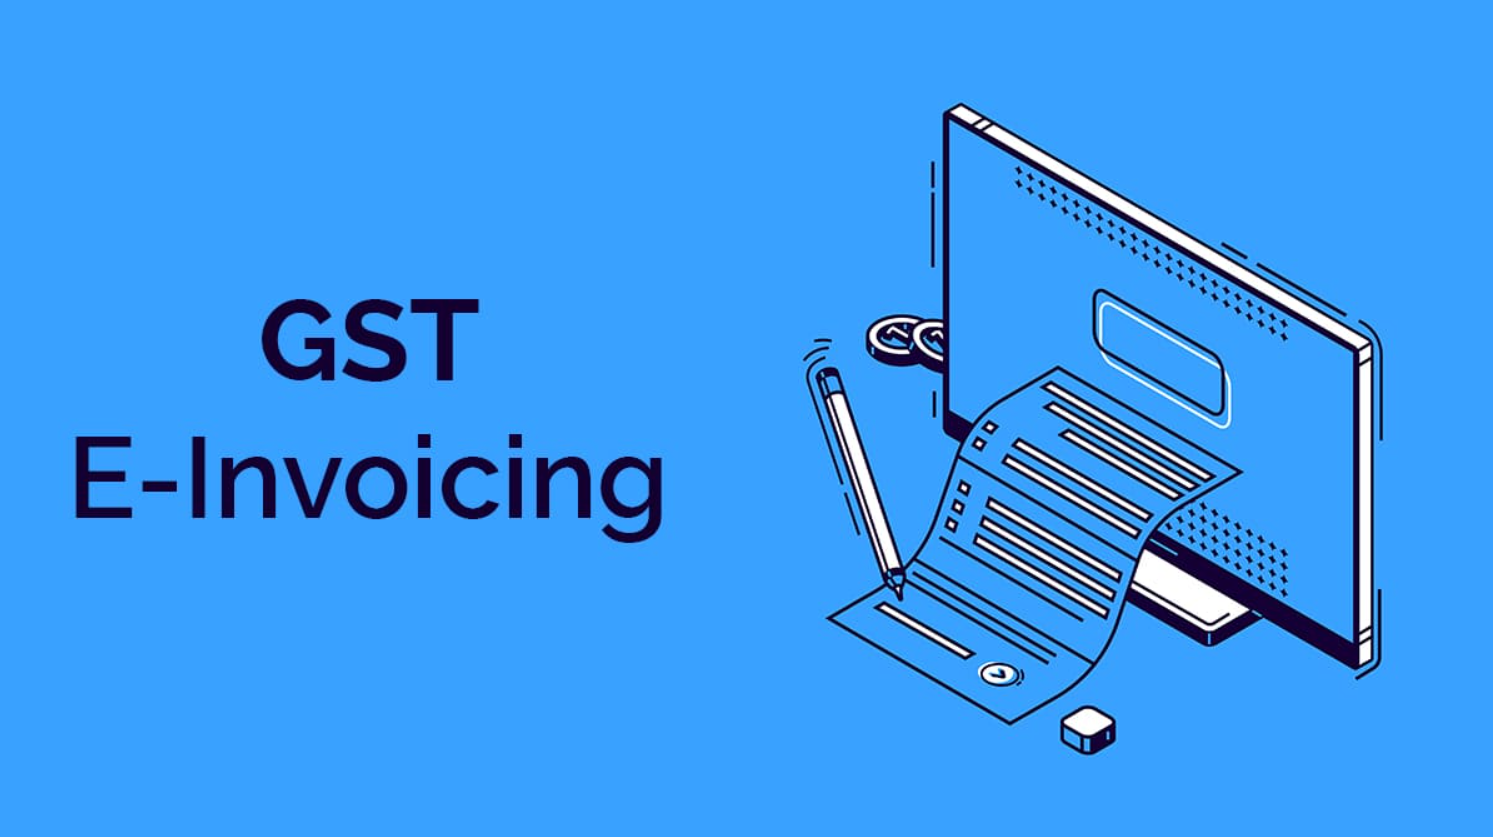 New GSTR-1 Update: GSTN enables Auto HSN Summary Import from E-Invoices for Efficient Filing